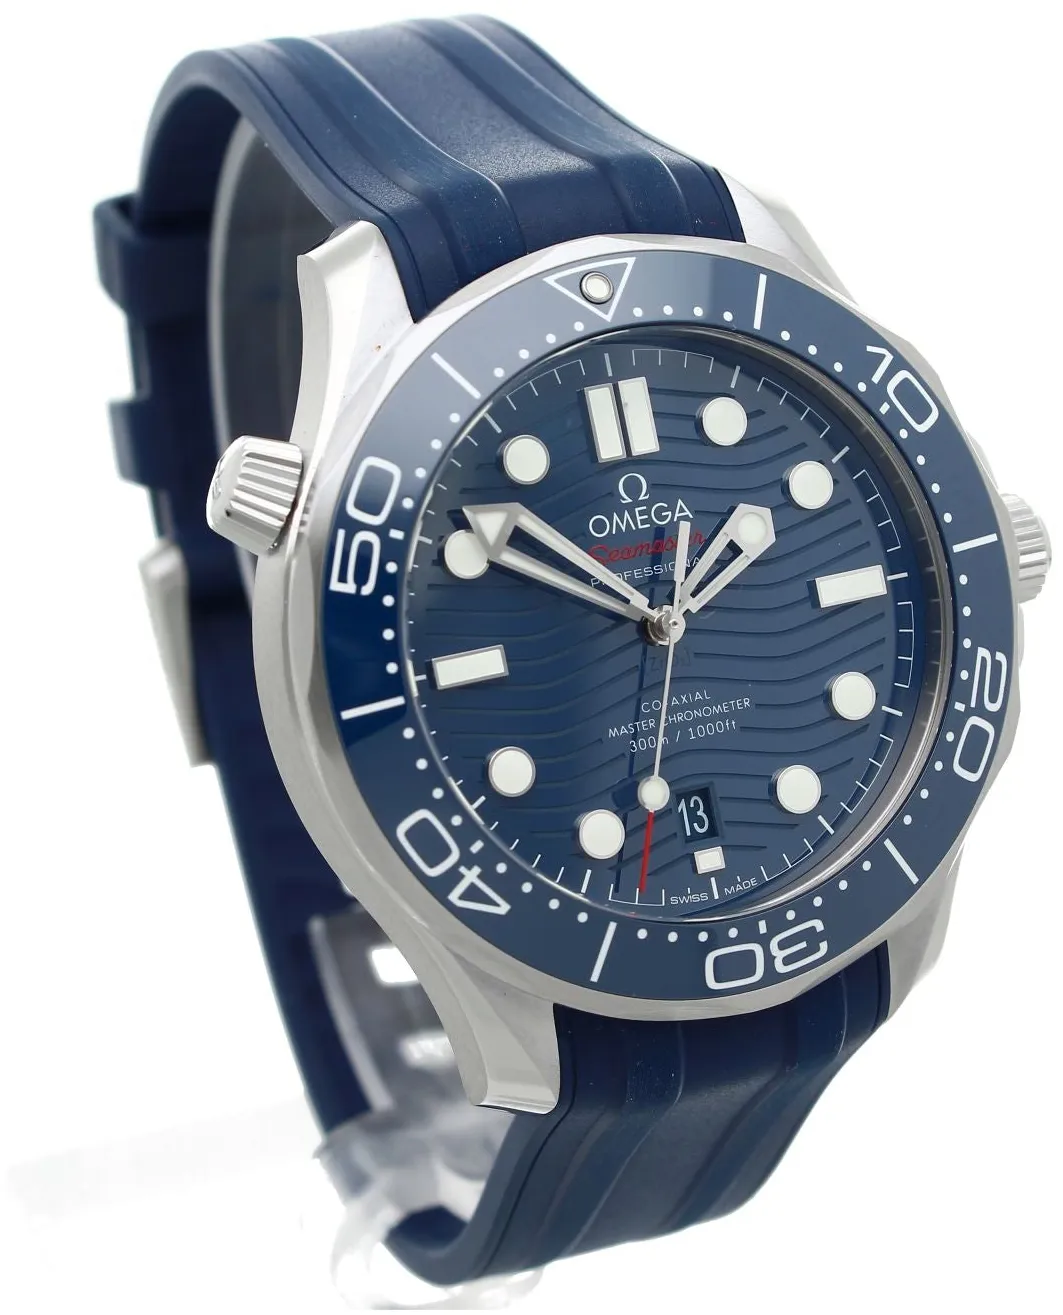 Omega Seamaster Diver 300M 210.32.42.20.03.001 42mm Stainless steel Blue 6